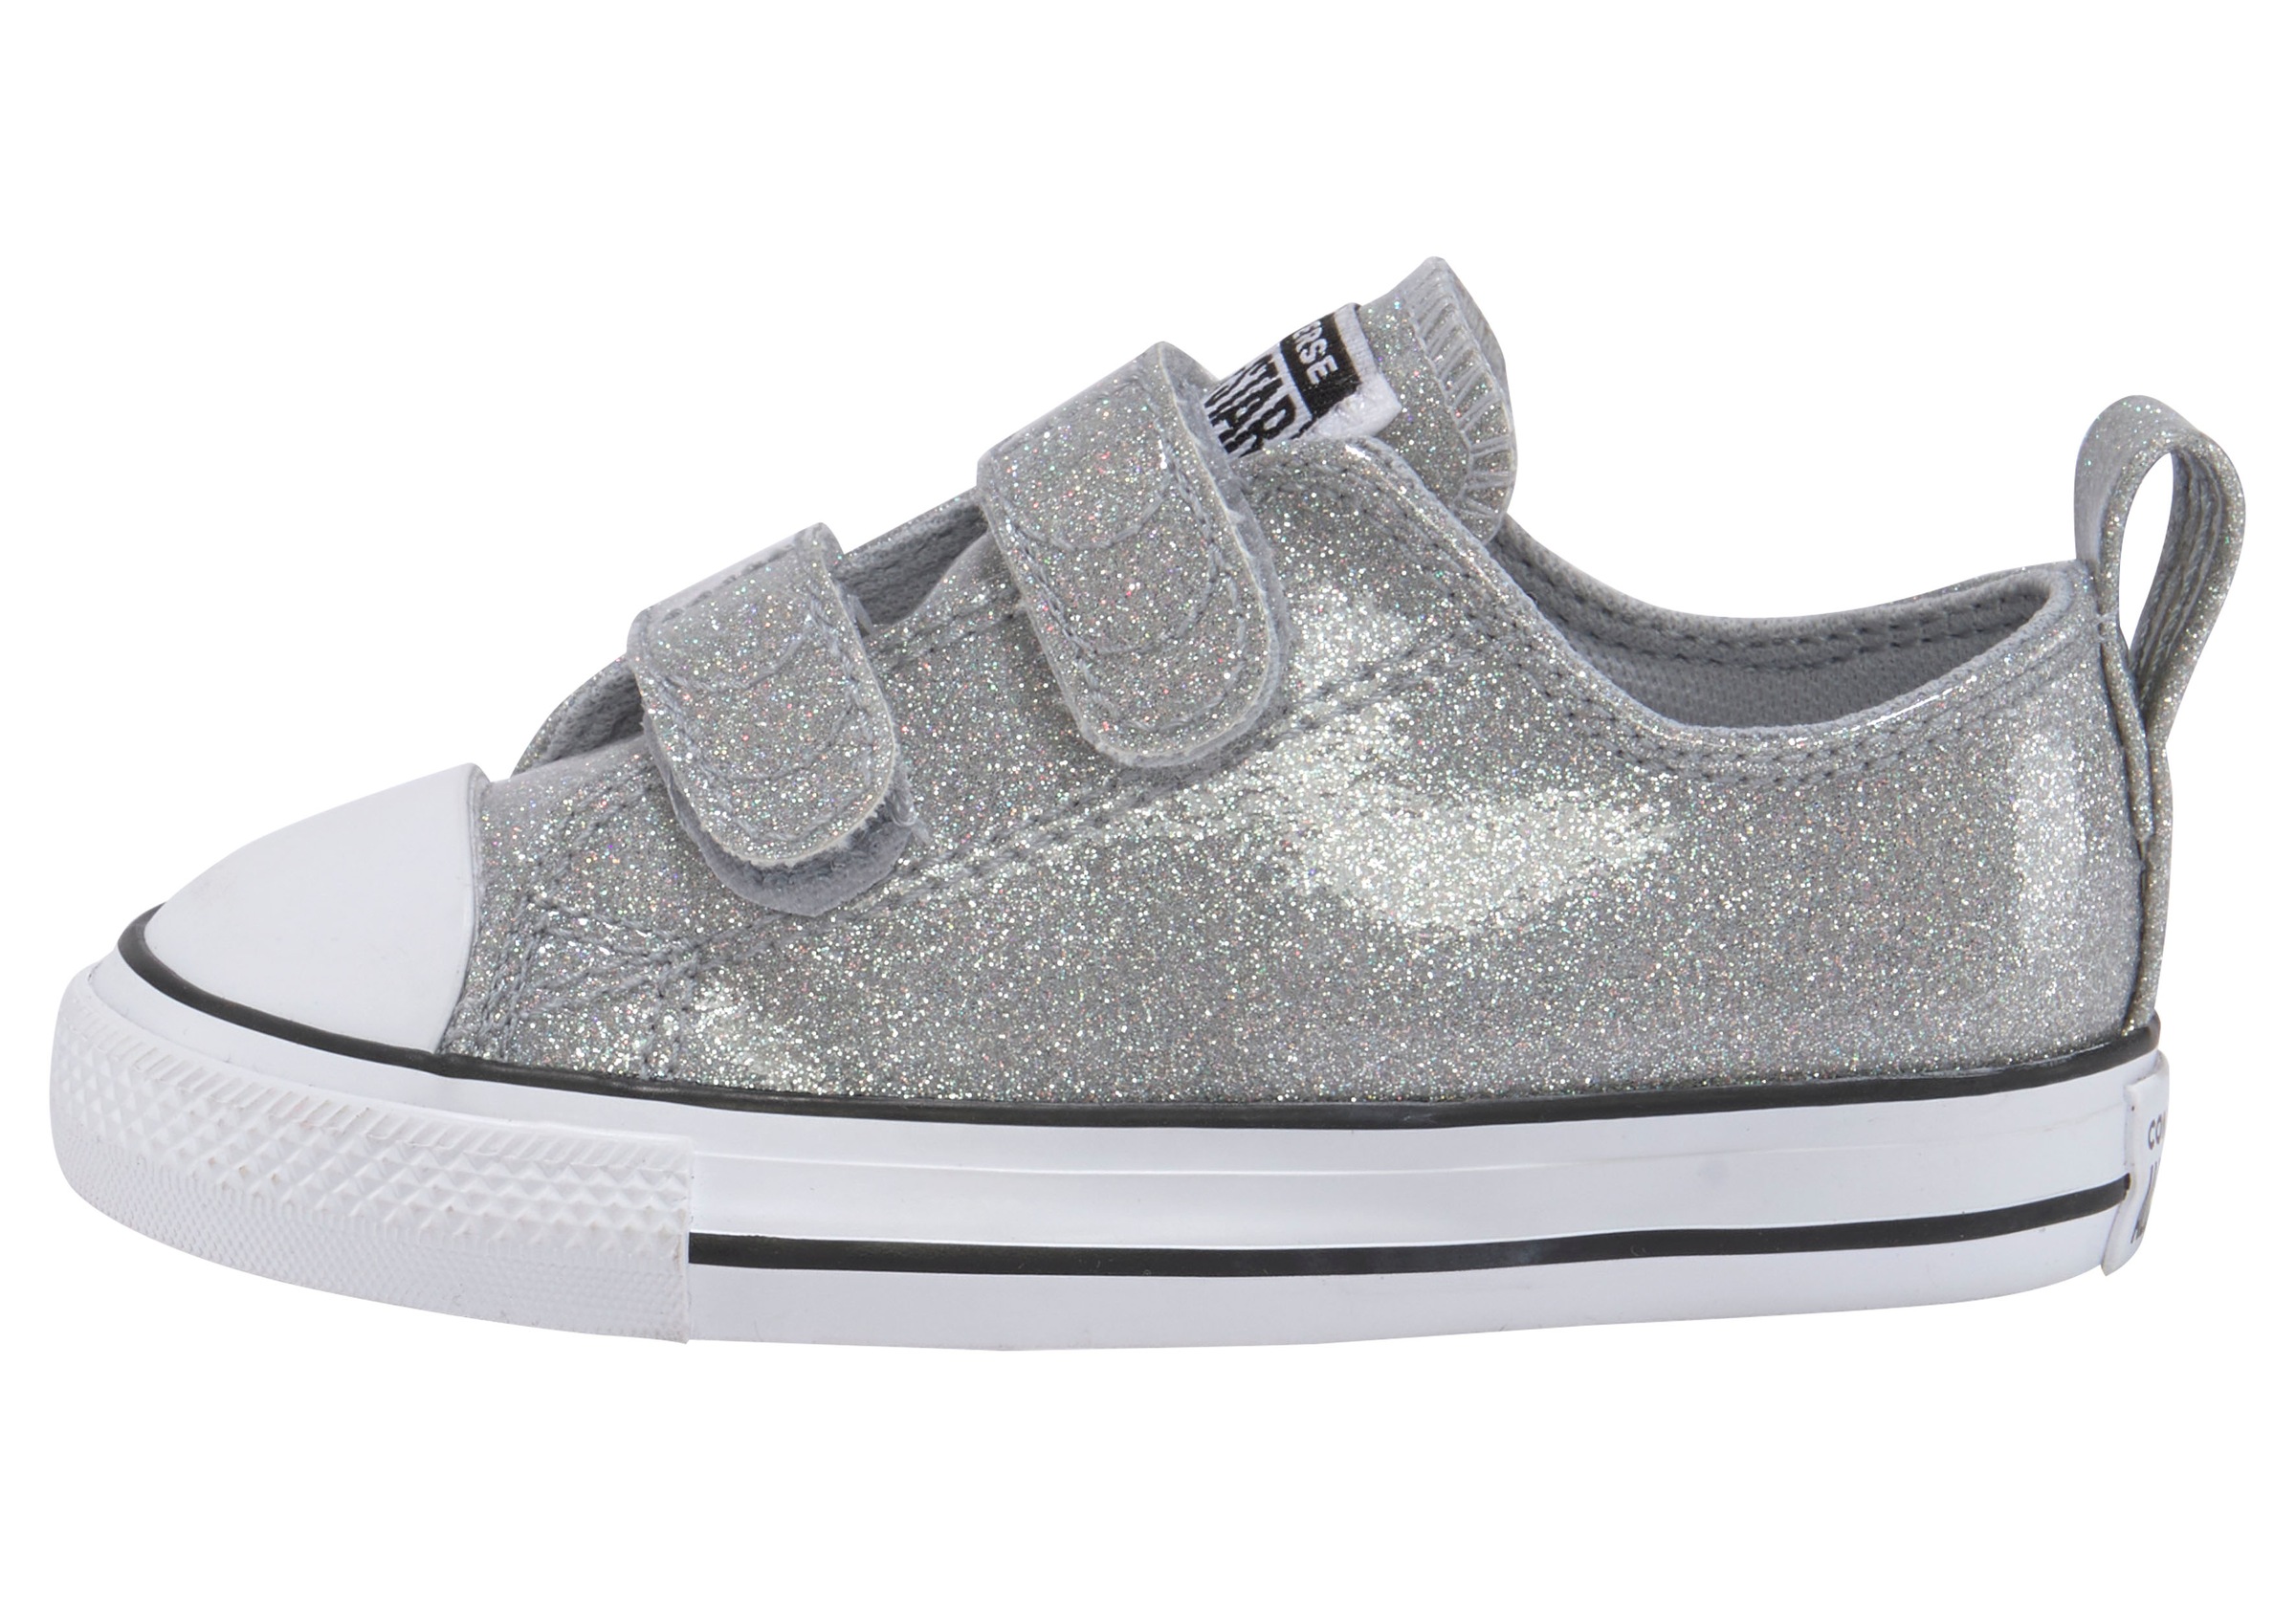 converse chuck taylor all star 2v glitter low top